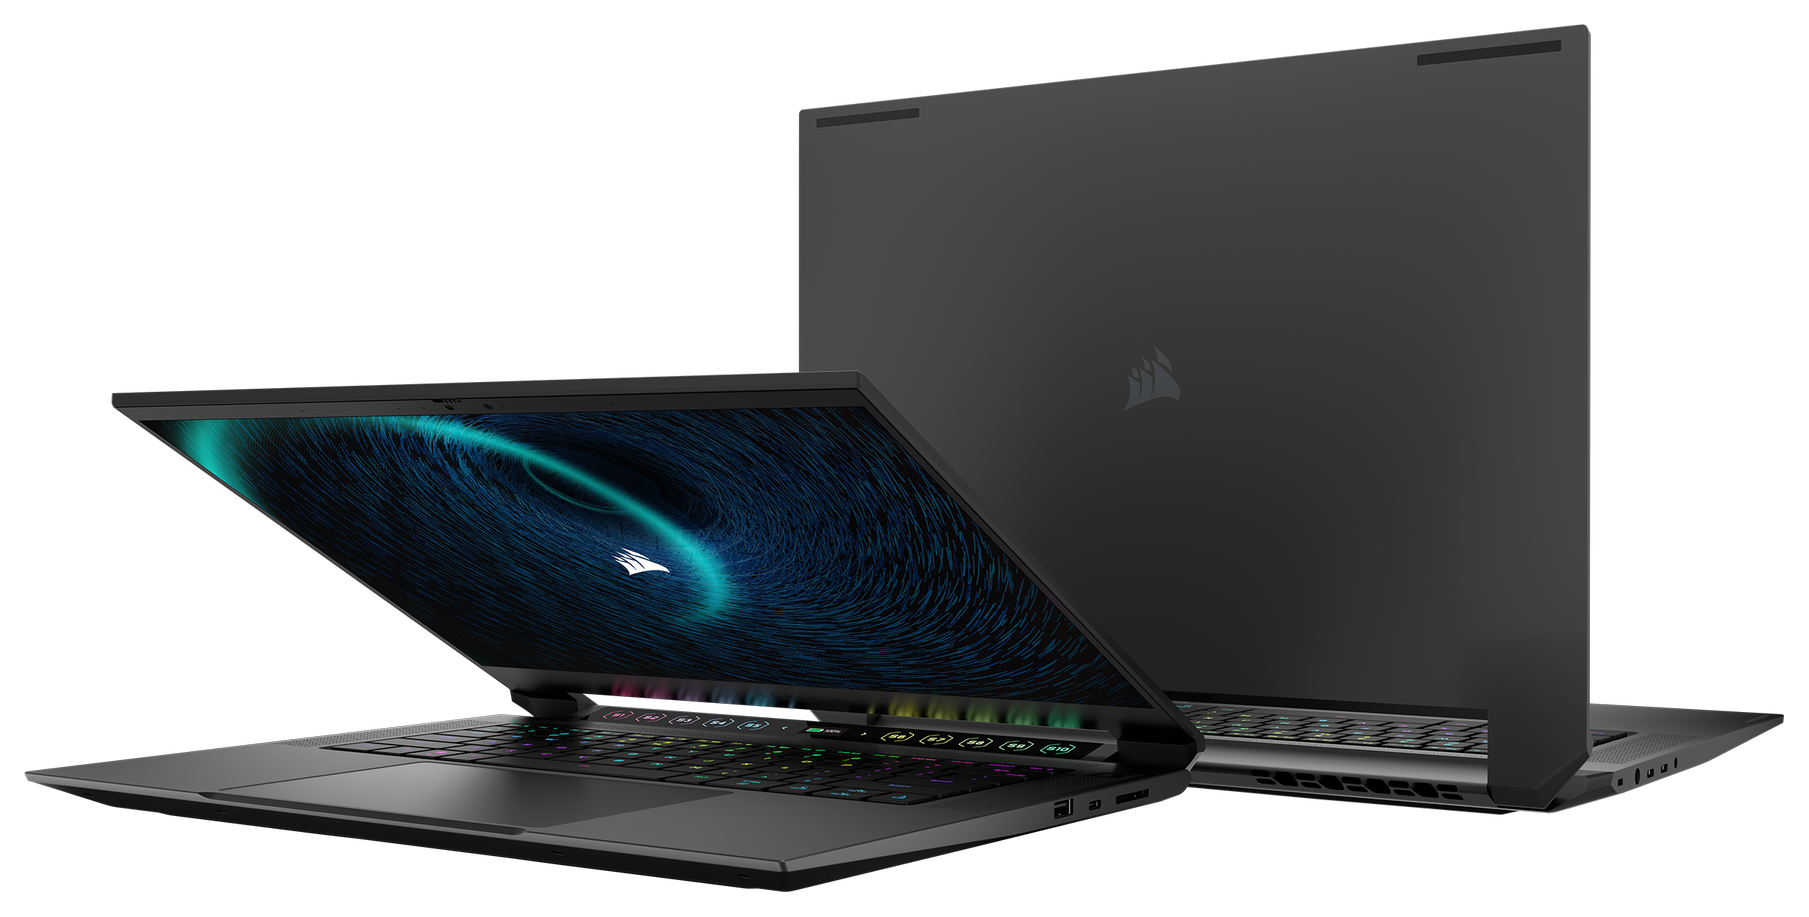 CORSAIR: introduces its new VOYAGER a1600 laptop